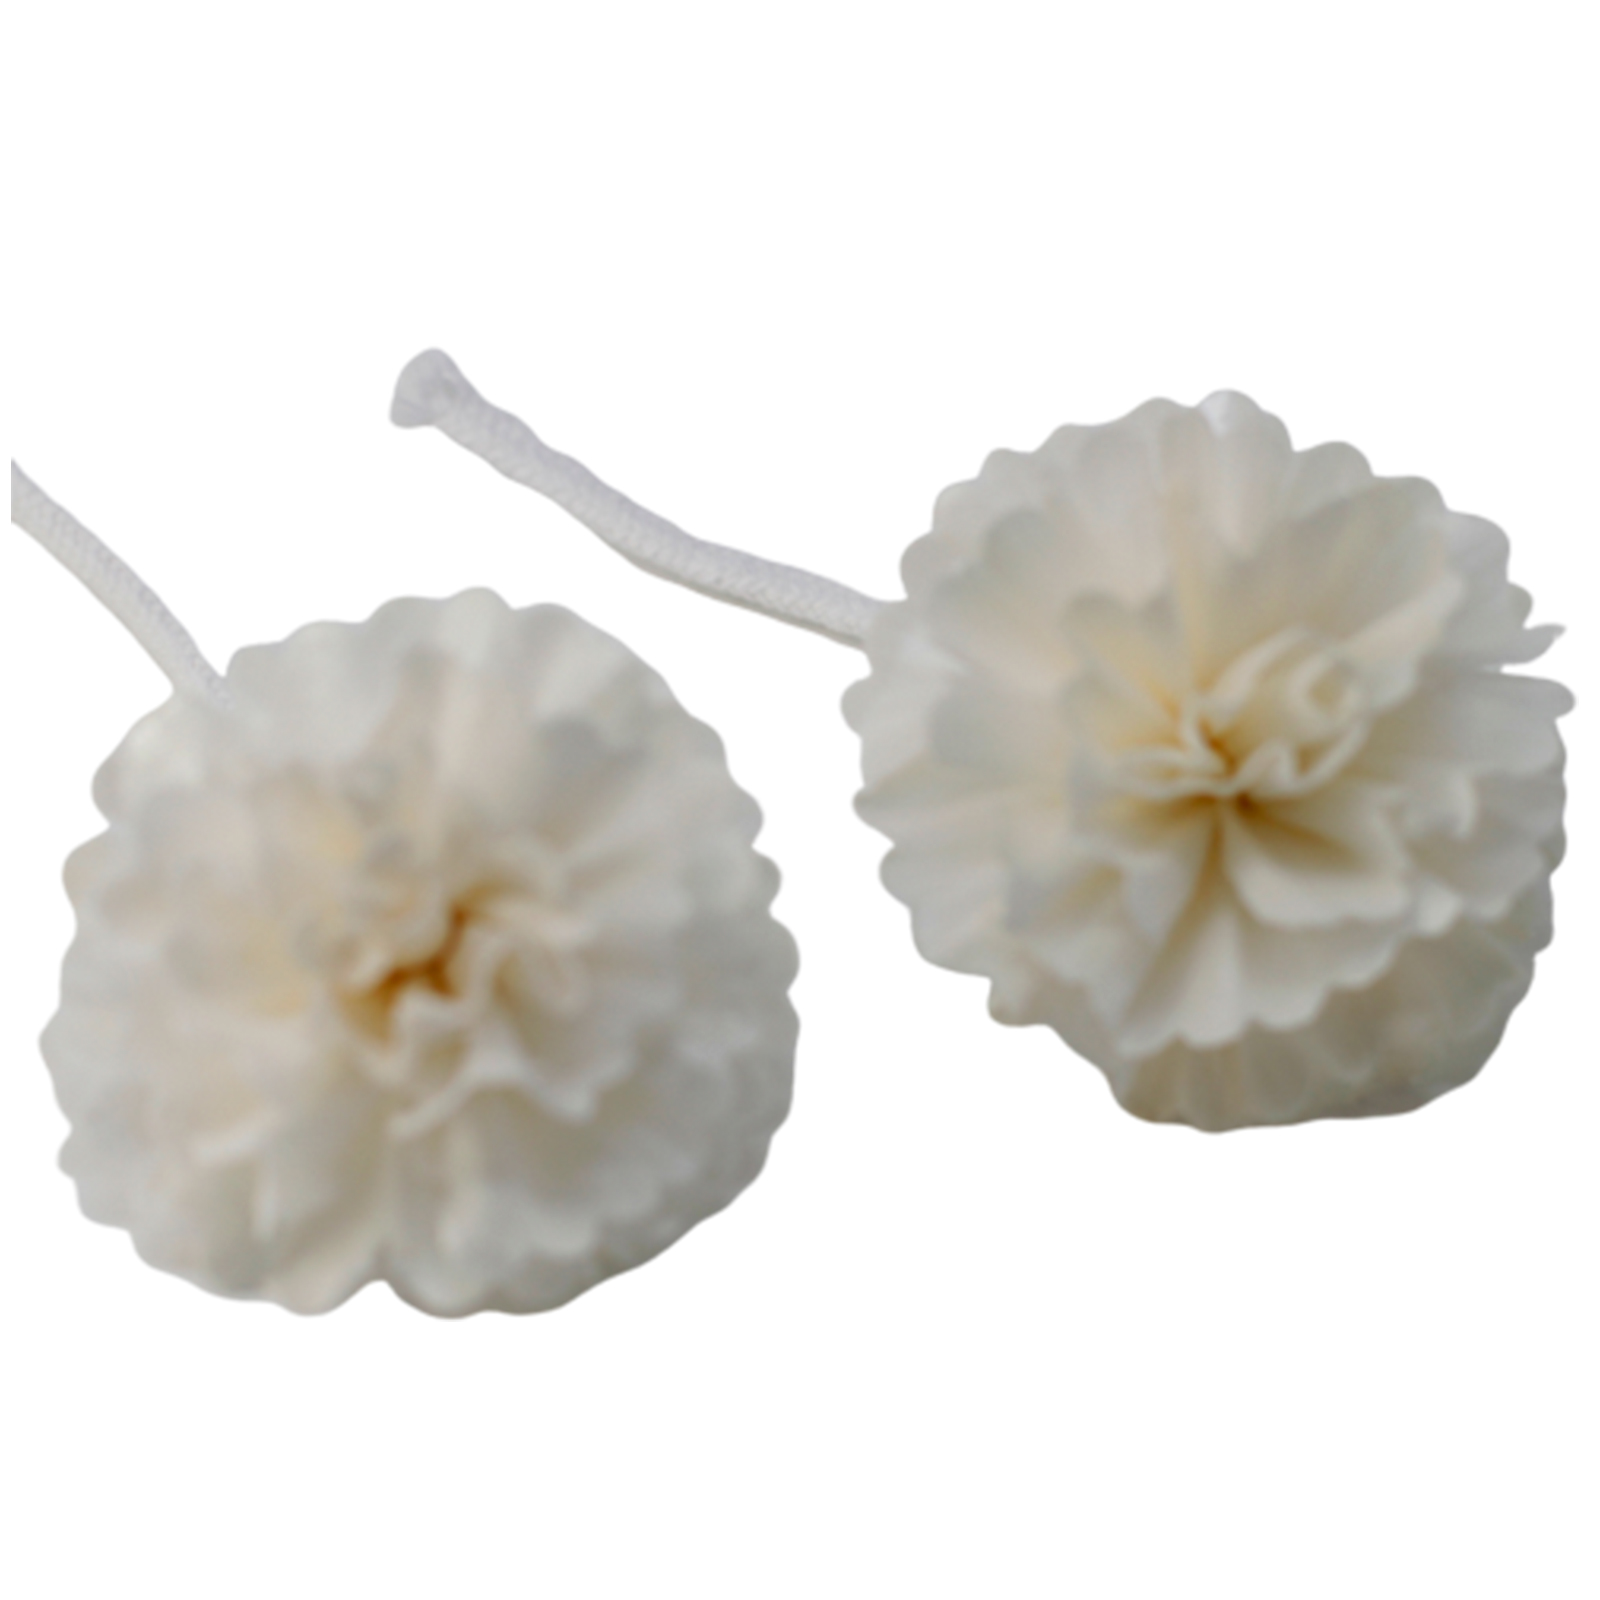 12 x Natural Diffuser Flowers - Medium Carnation on String - Click Image to Close